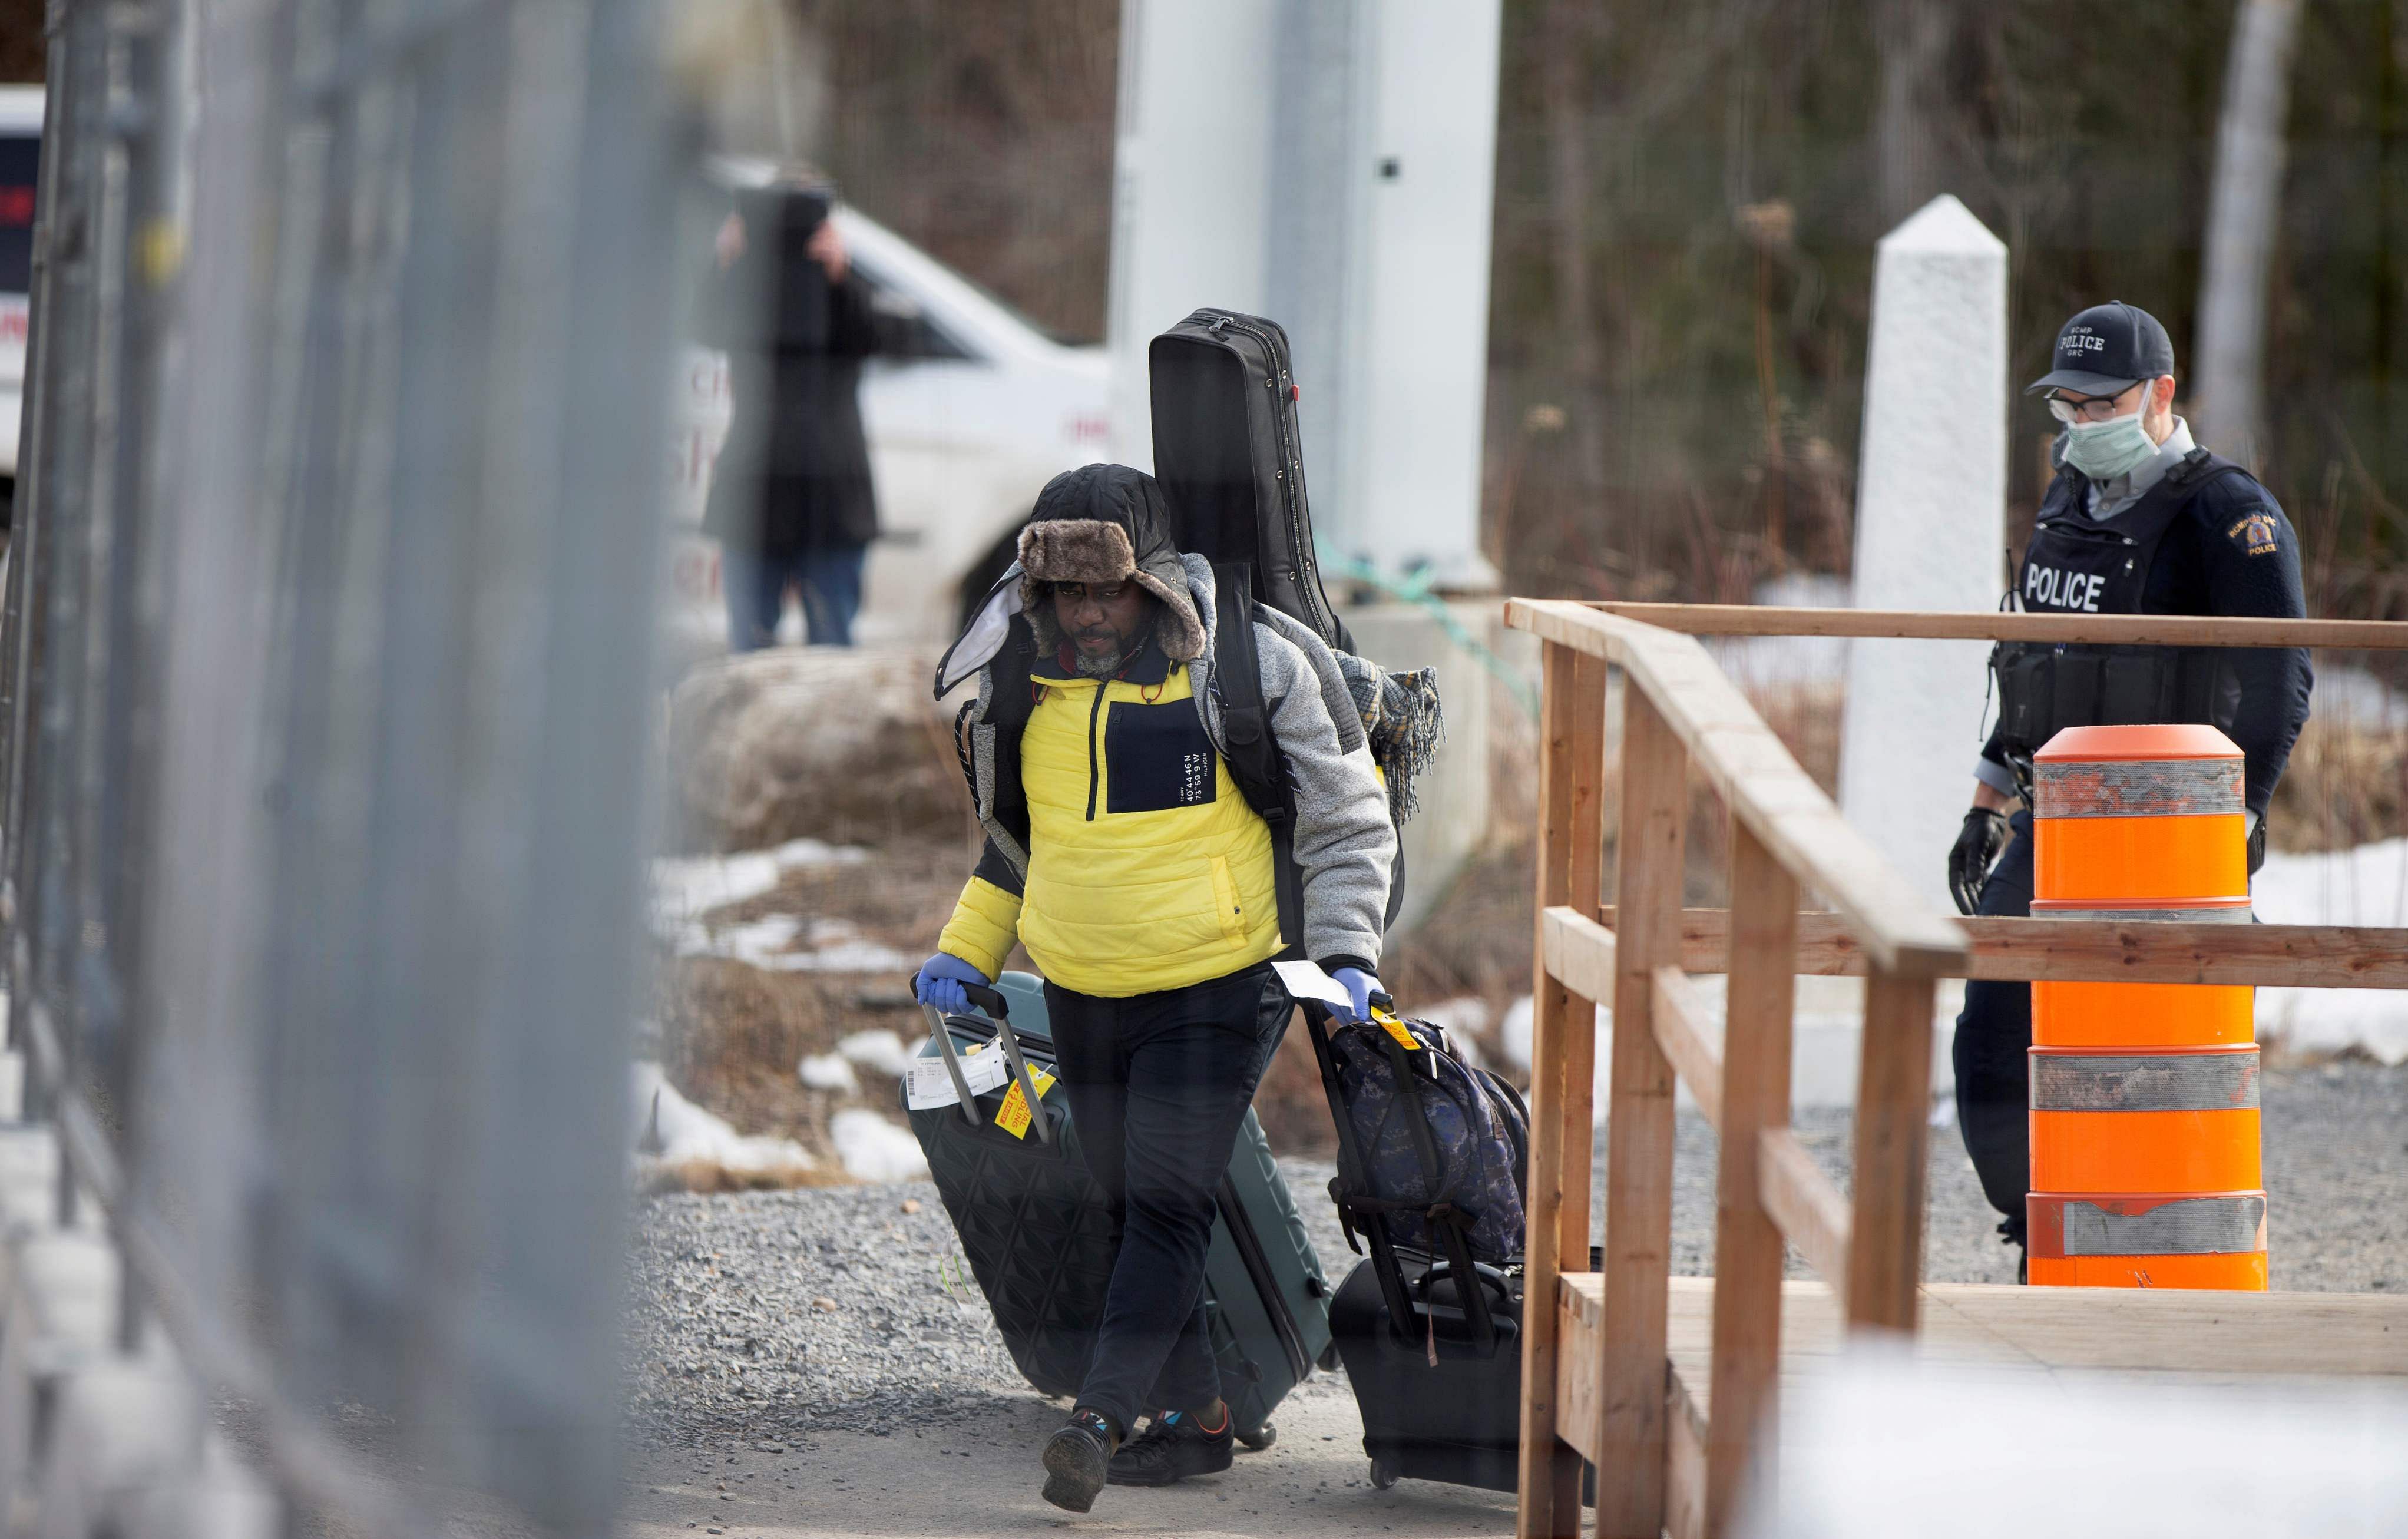 FILE PHOTO: An asylum seeker crosses the border from New York into Canada followed by a Royal Canadian Mounted Police (RCMP) officer at Roxham Road in Hemmingford, Quebec, Canada. (Credit: Reuters)